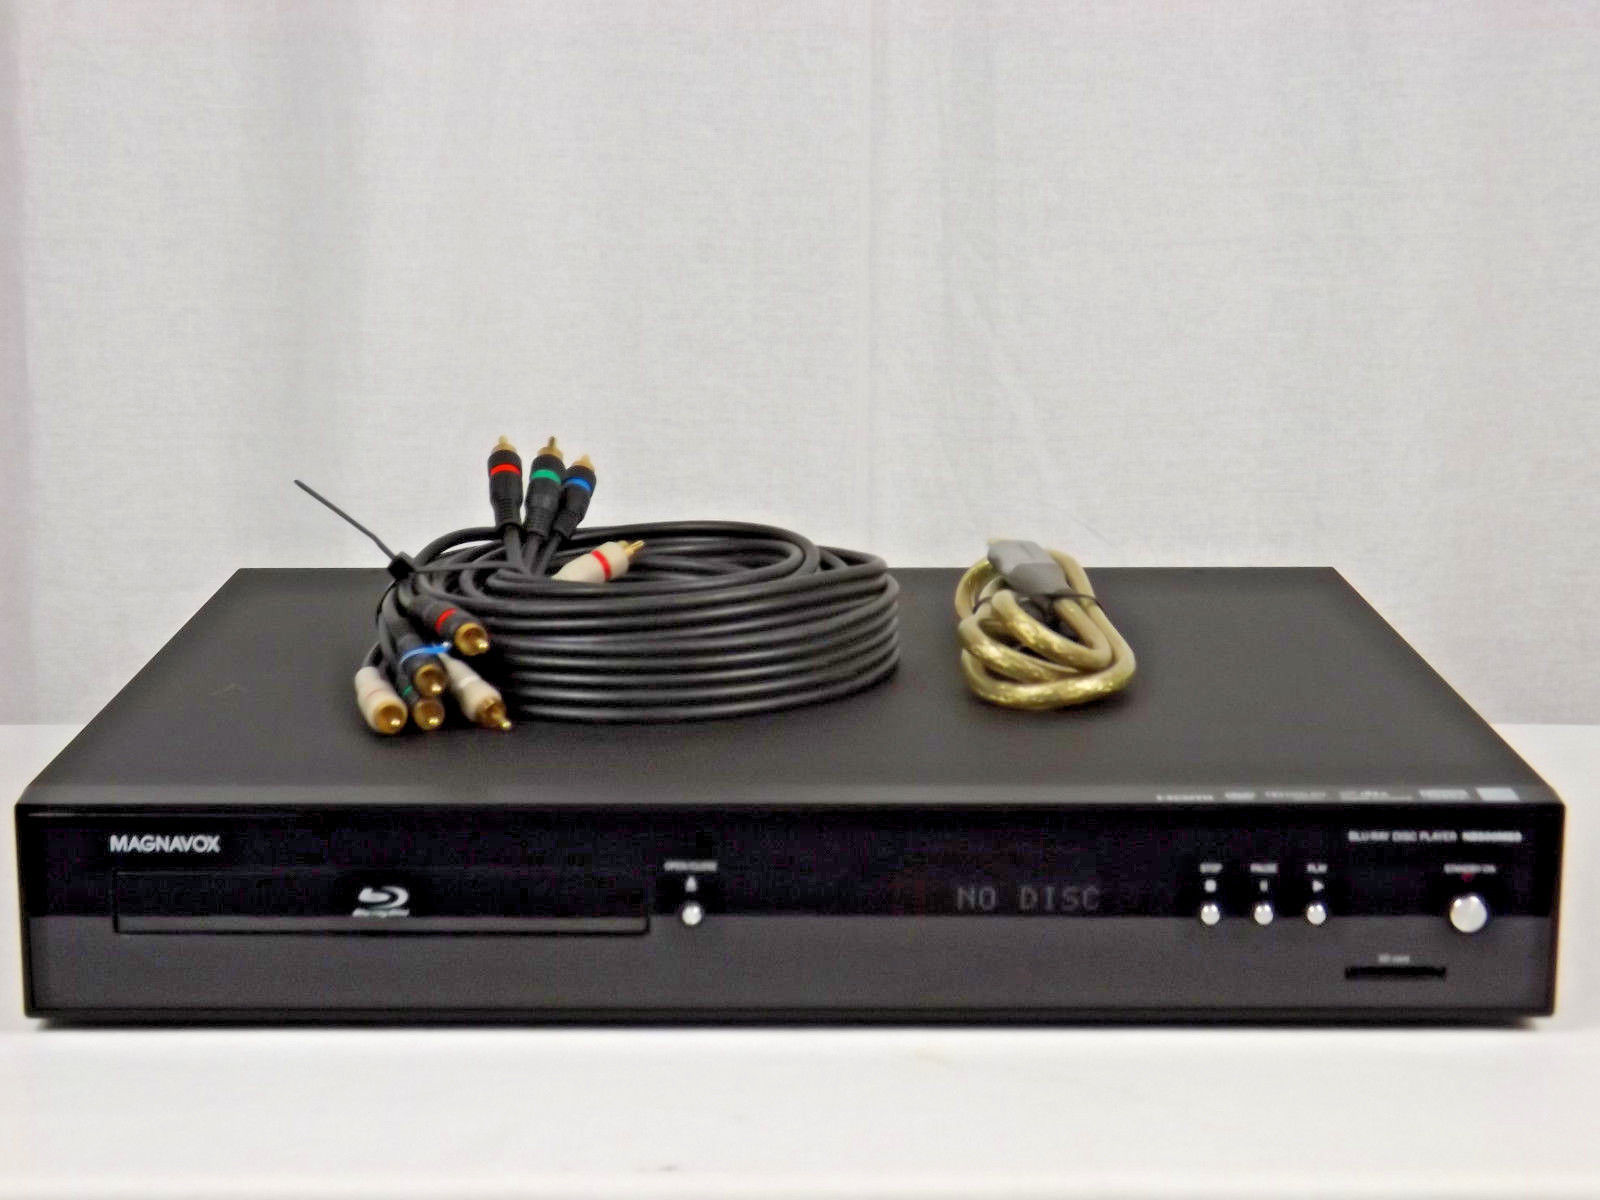 MAGNAVOX NB500MS9 Blu-Ray Disc Player - TESTED & WORKS GREAT ! - $19.75